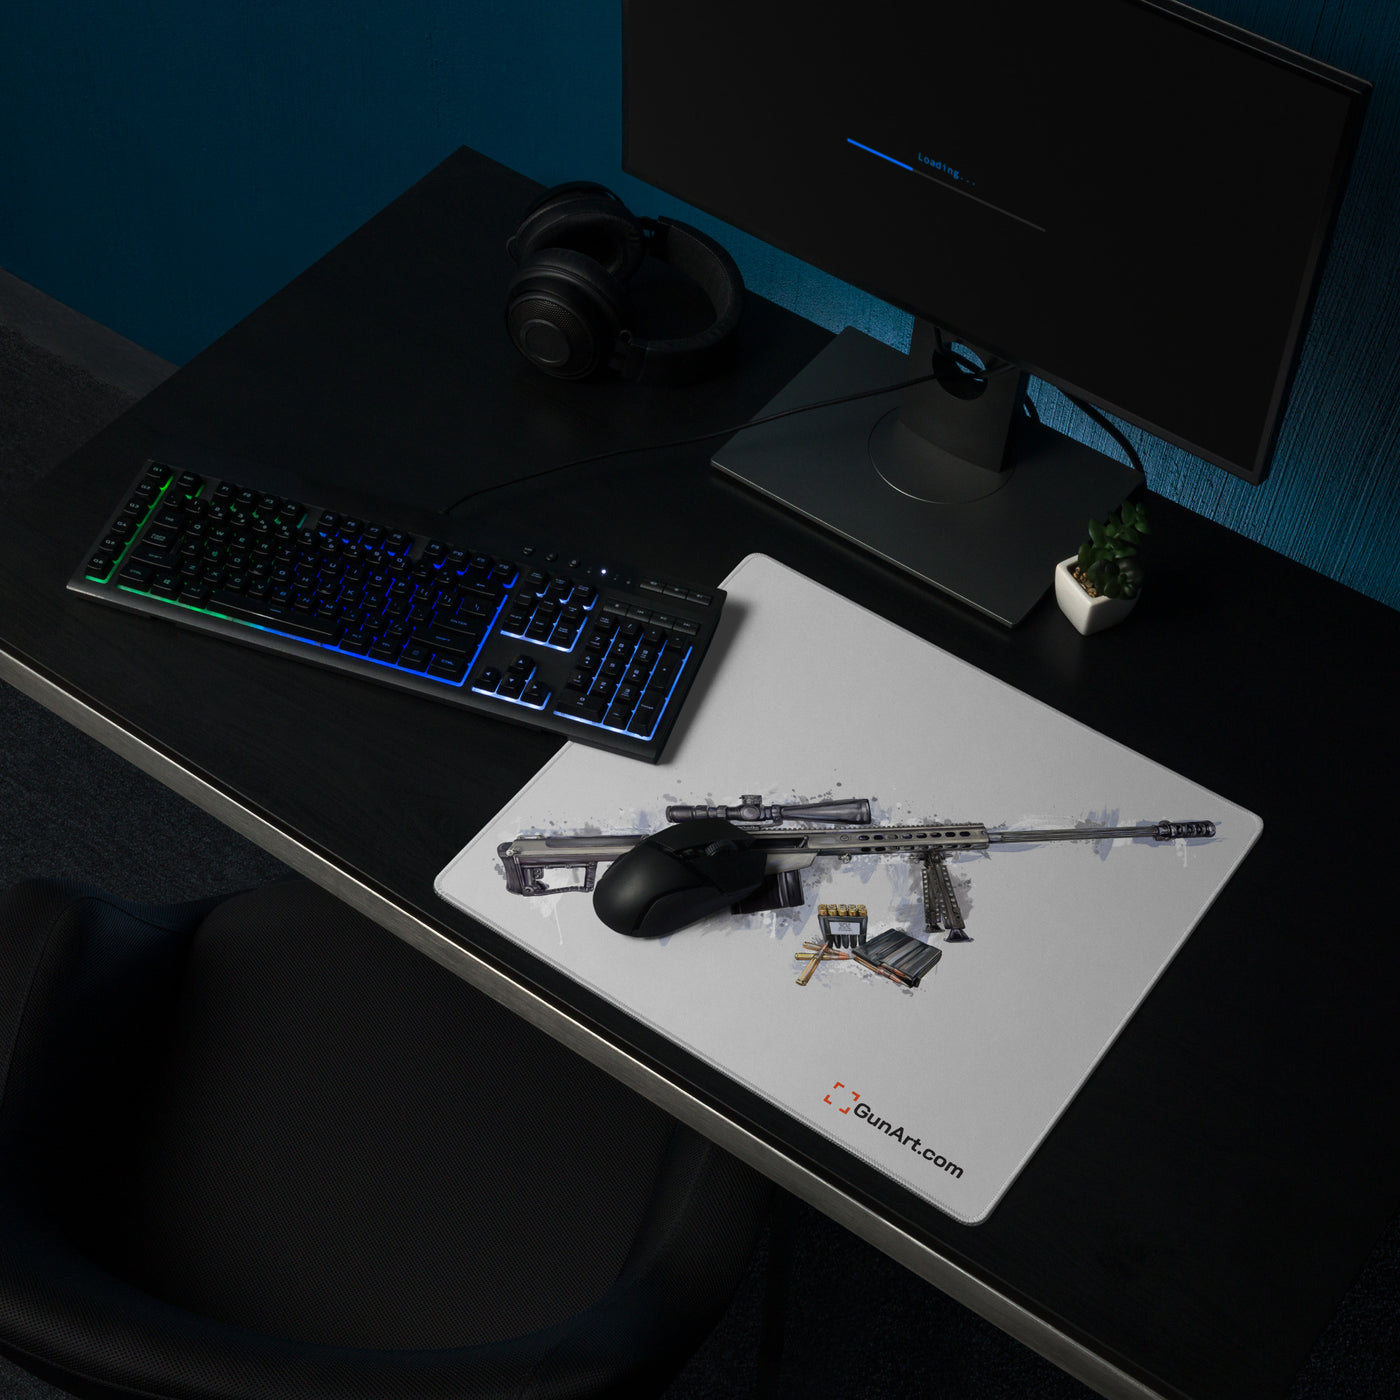 The Long-Range Legend - Blue .50 Cal BMG Rifle Gaming Mouse Pad - Grey Background